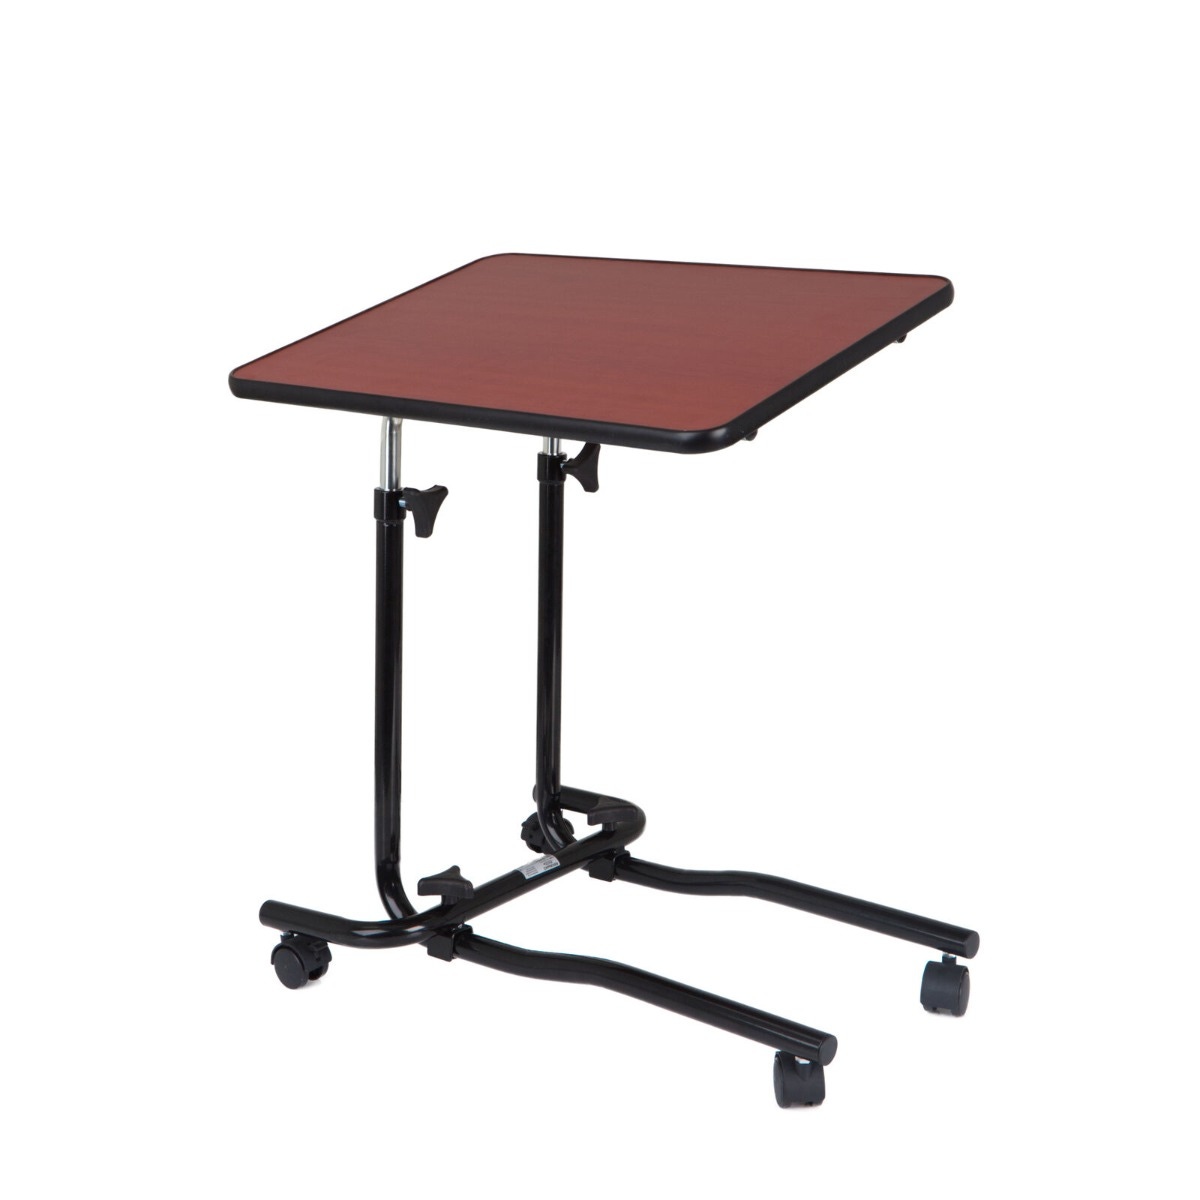 Homecraft Overbed Table